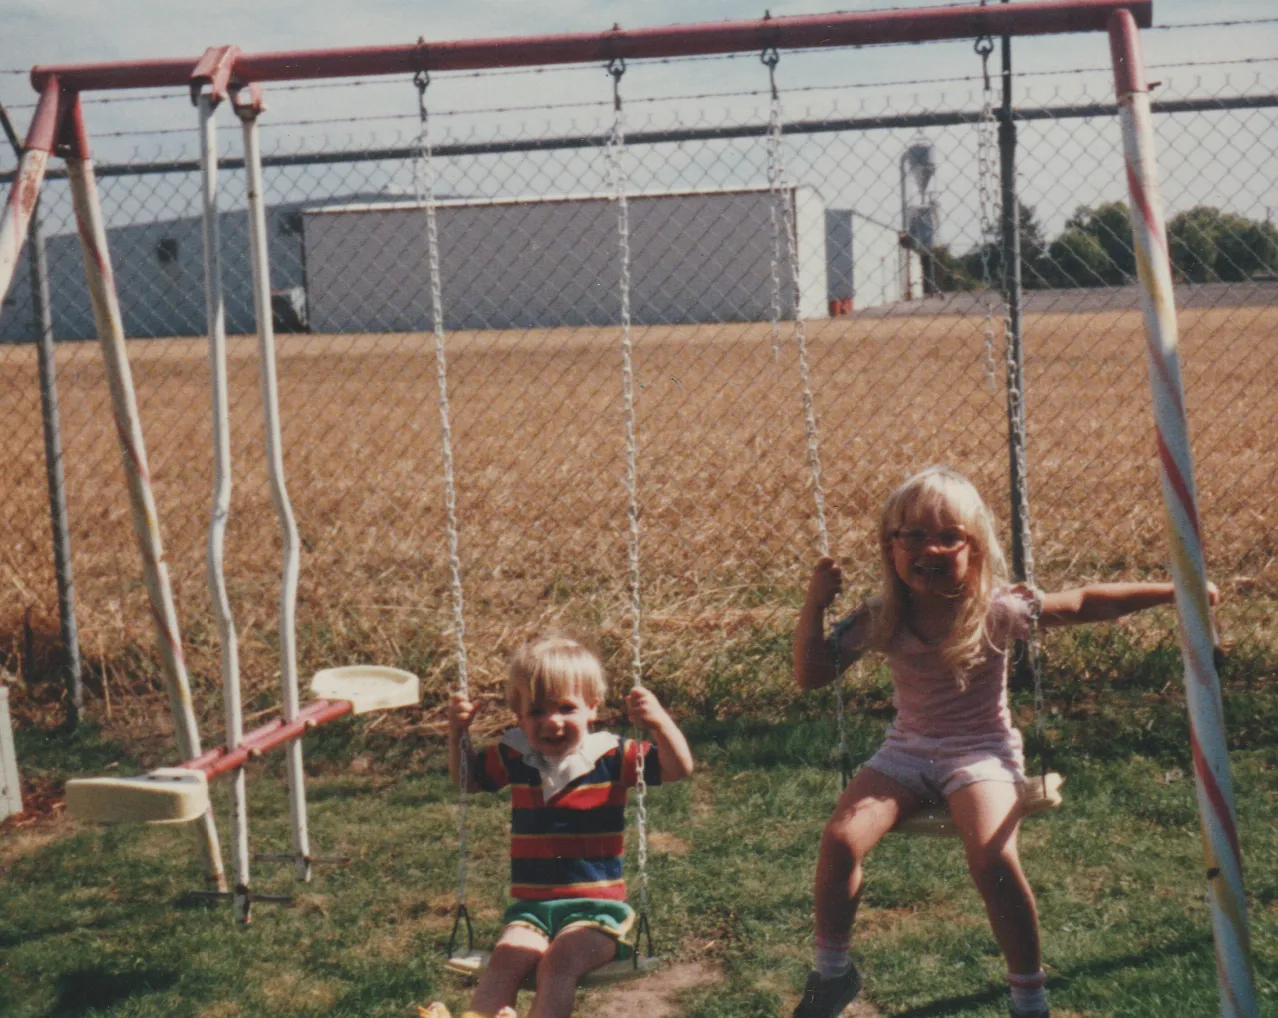 1984-07 - Summer of 1984 - Katie, Ricky, 163 front yard, swing, fun, behind big tree by the fence and field CROPPED.png